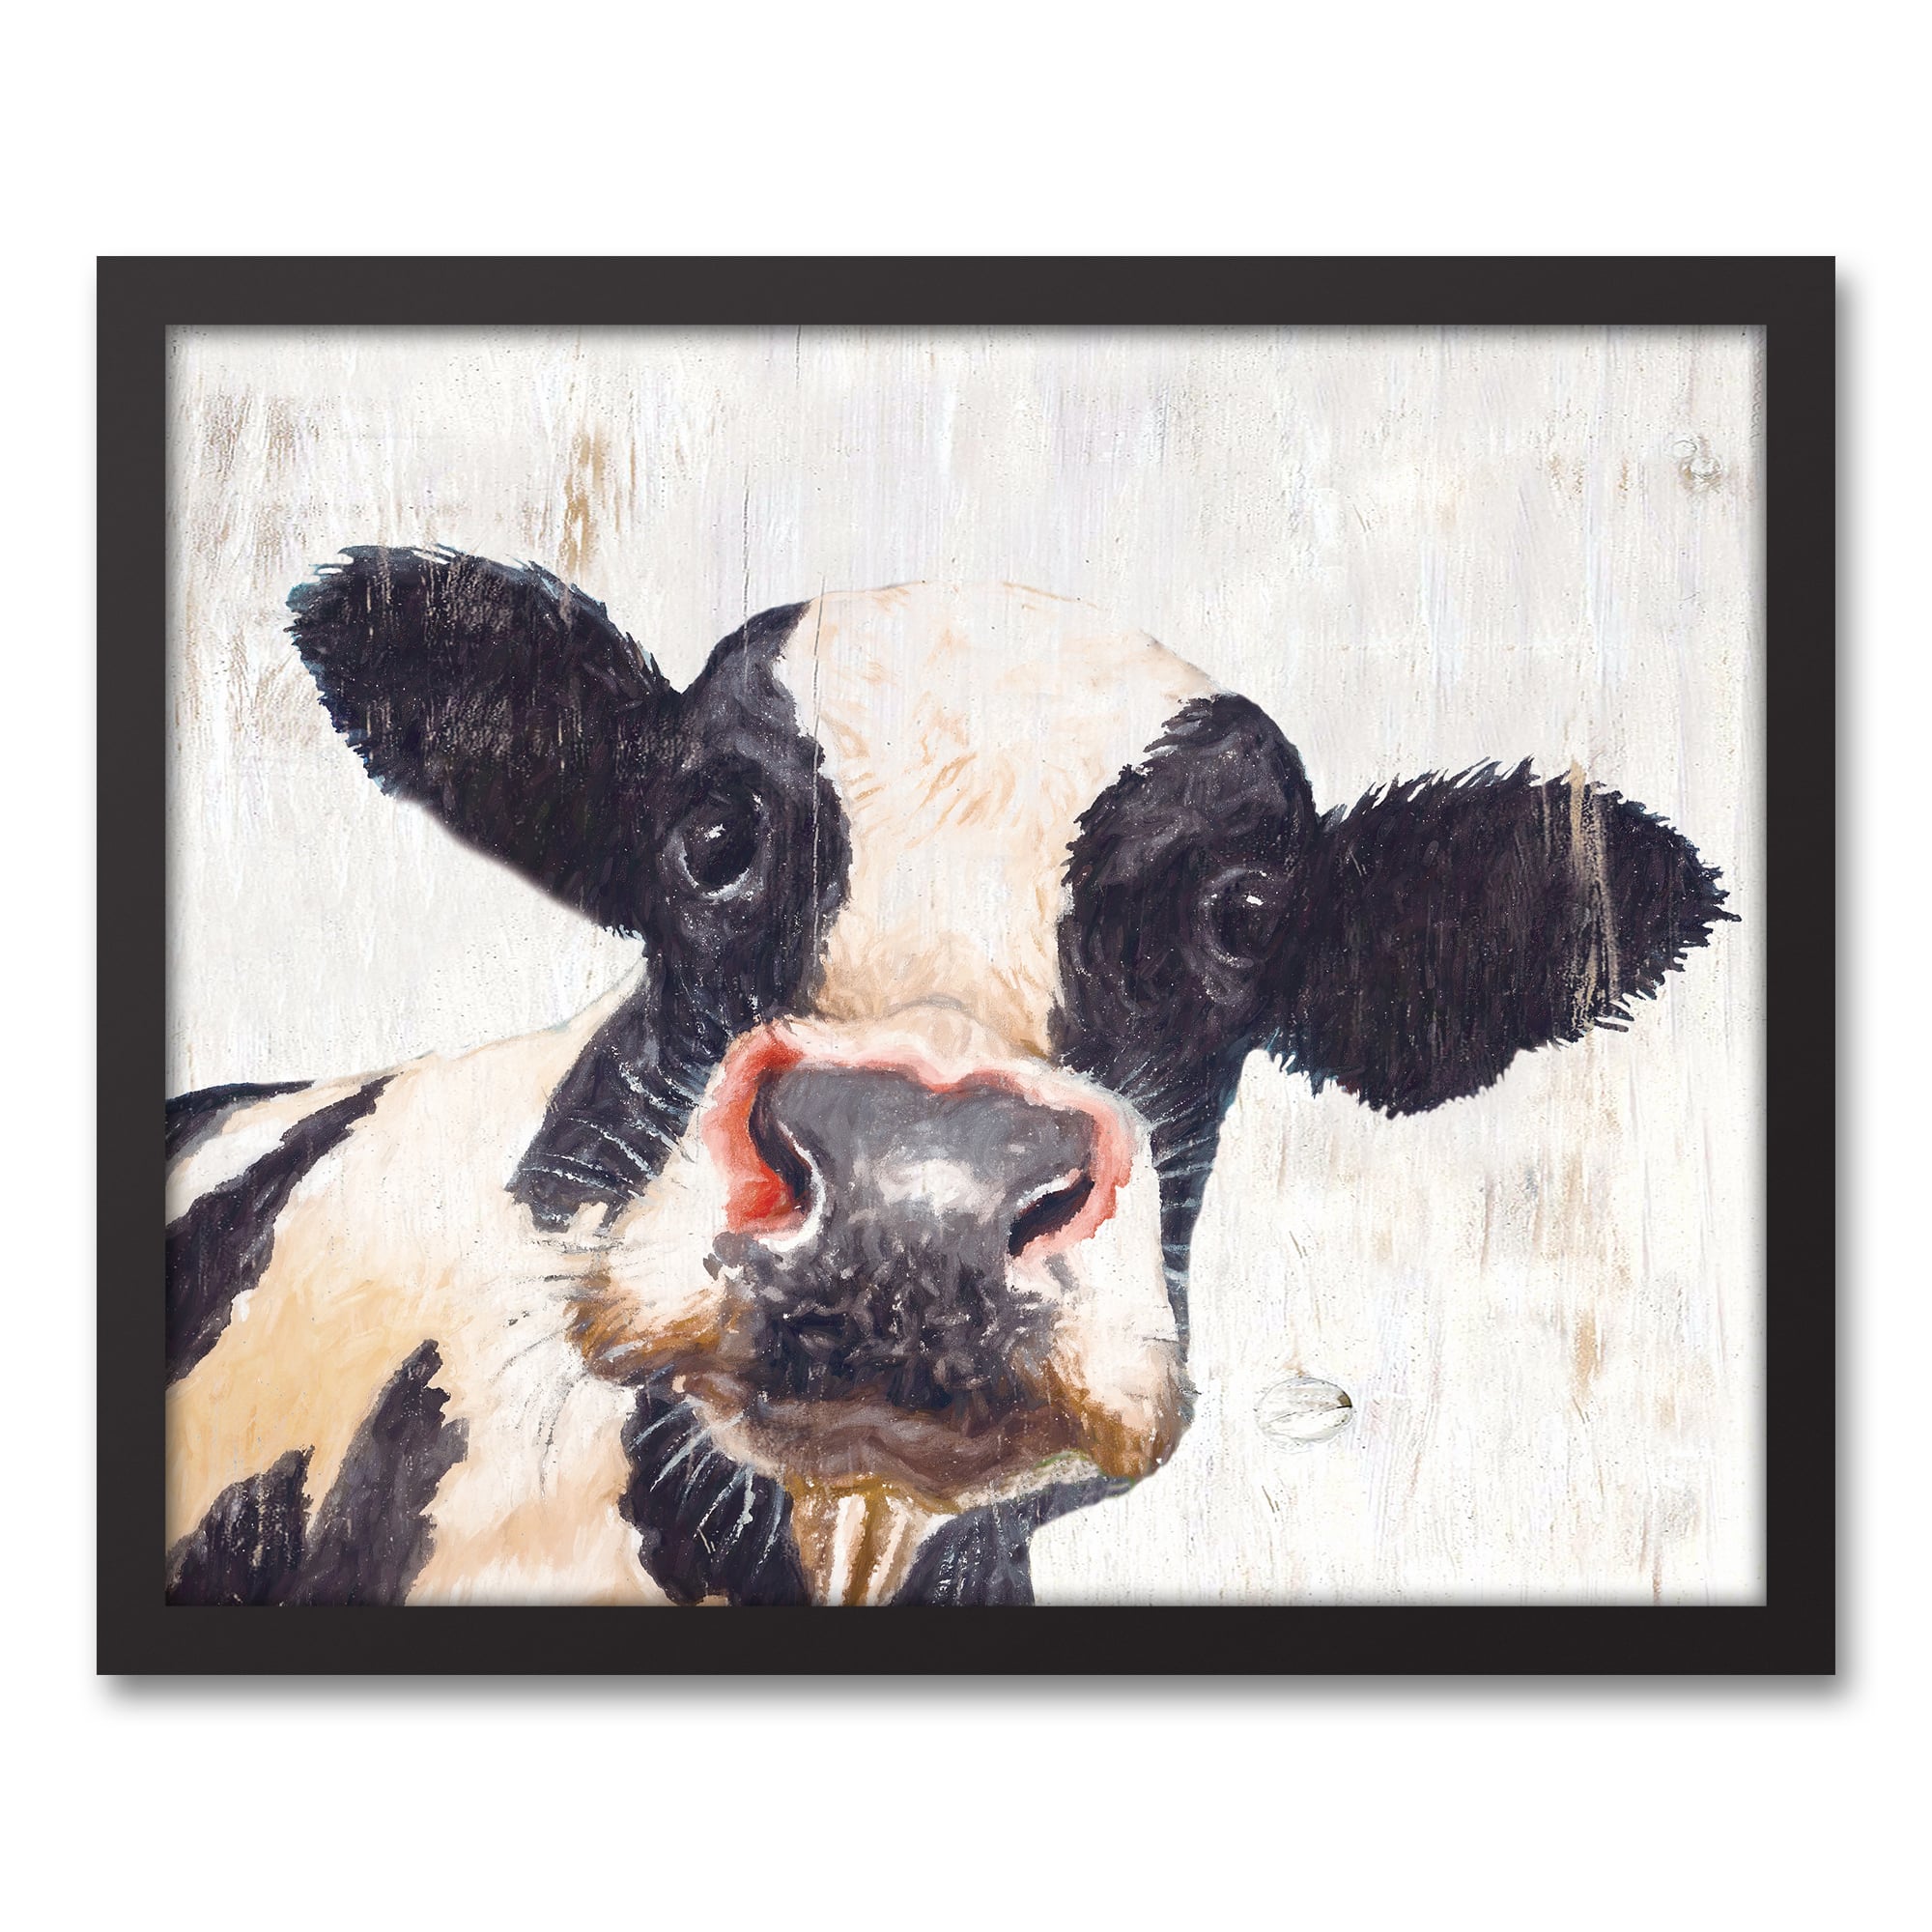 Neutral Staring Cow Black Framed Canvas